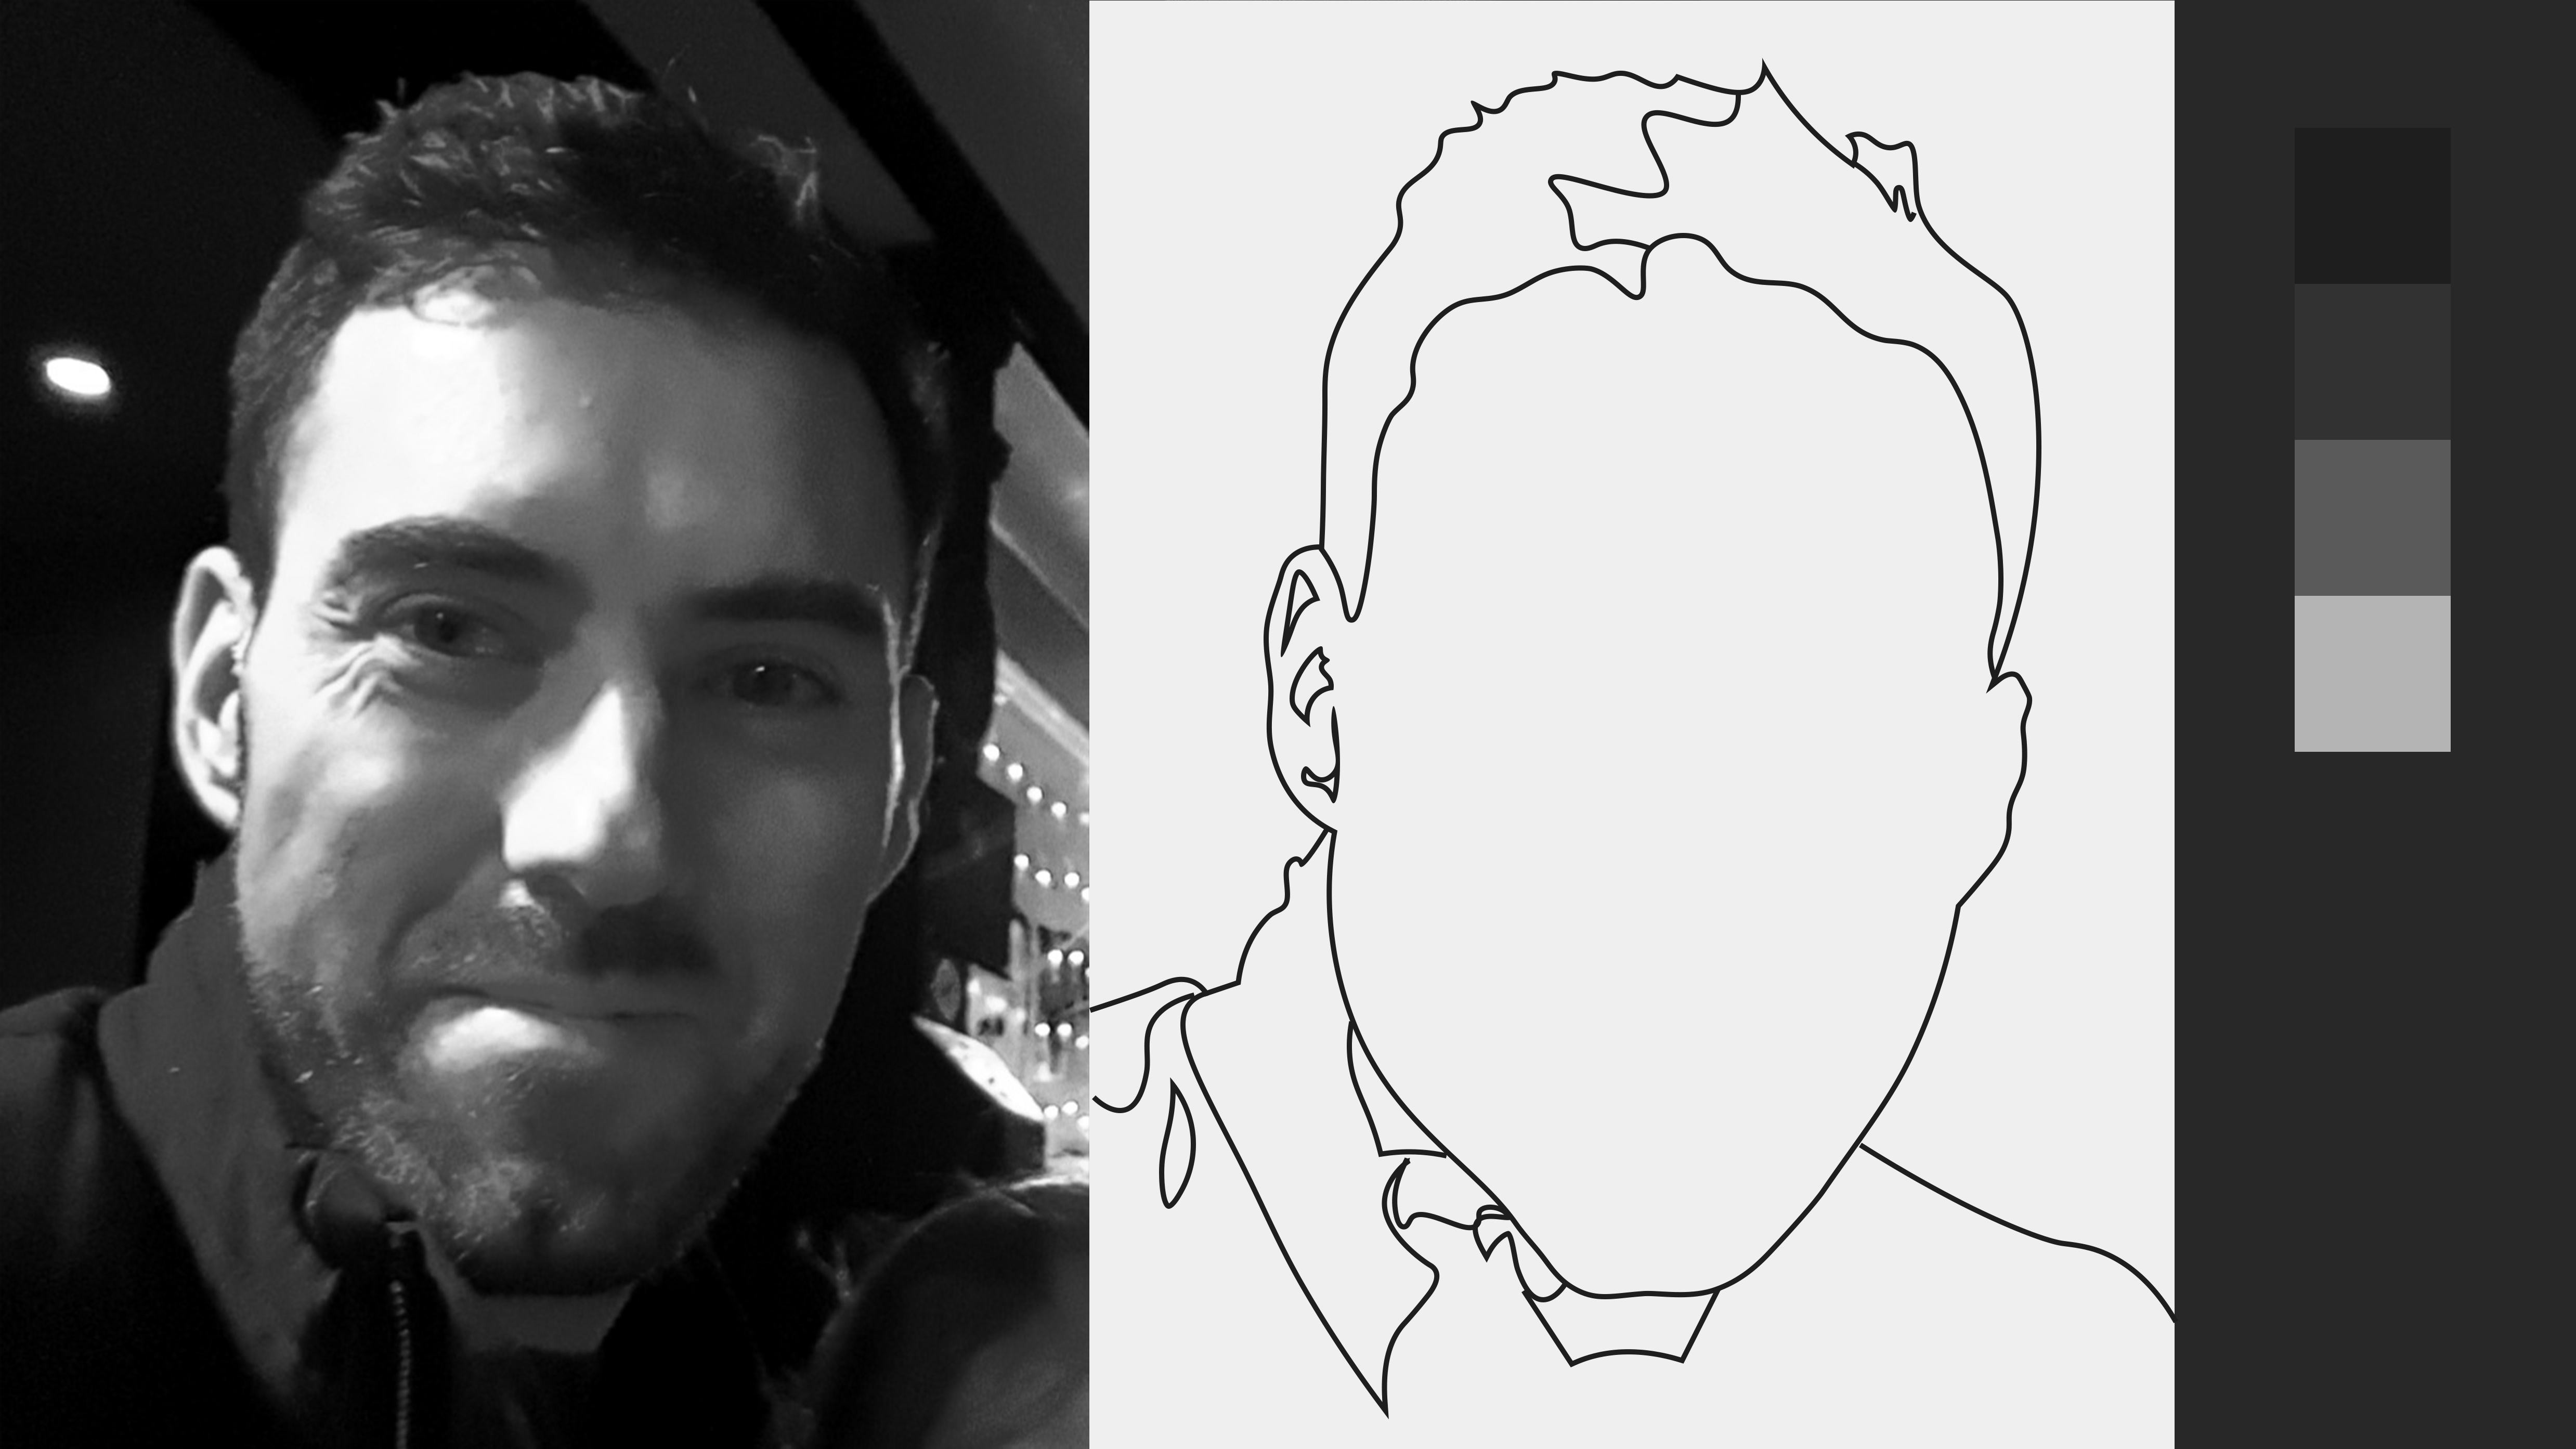 The first step for your grayscale portrait is to transfer the outline of the image on your canvas and marking the areas where there is a clear shift in value (where the light and shadow meet).